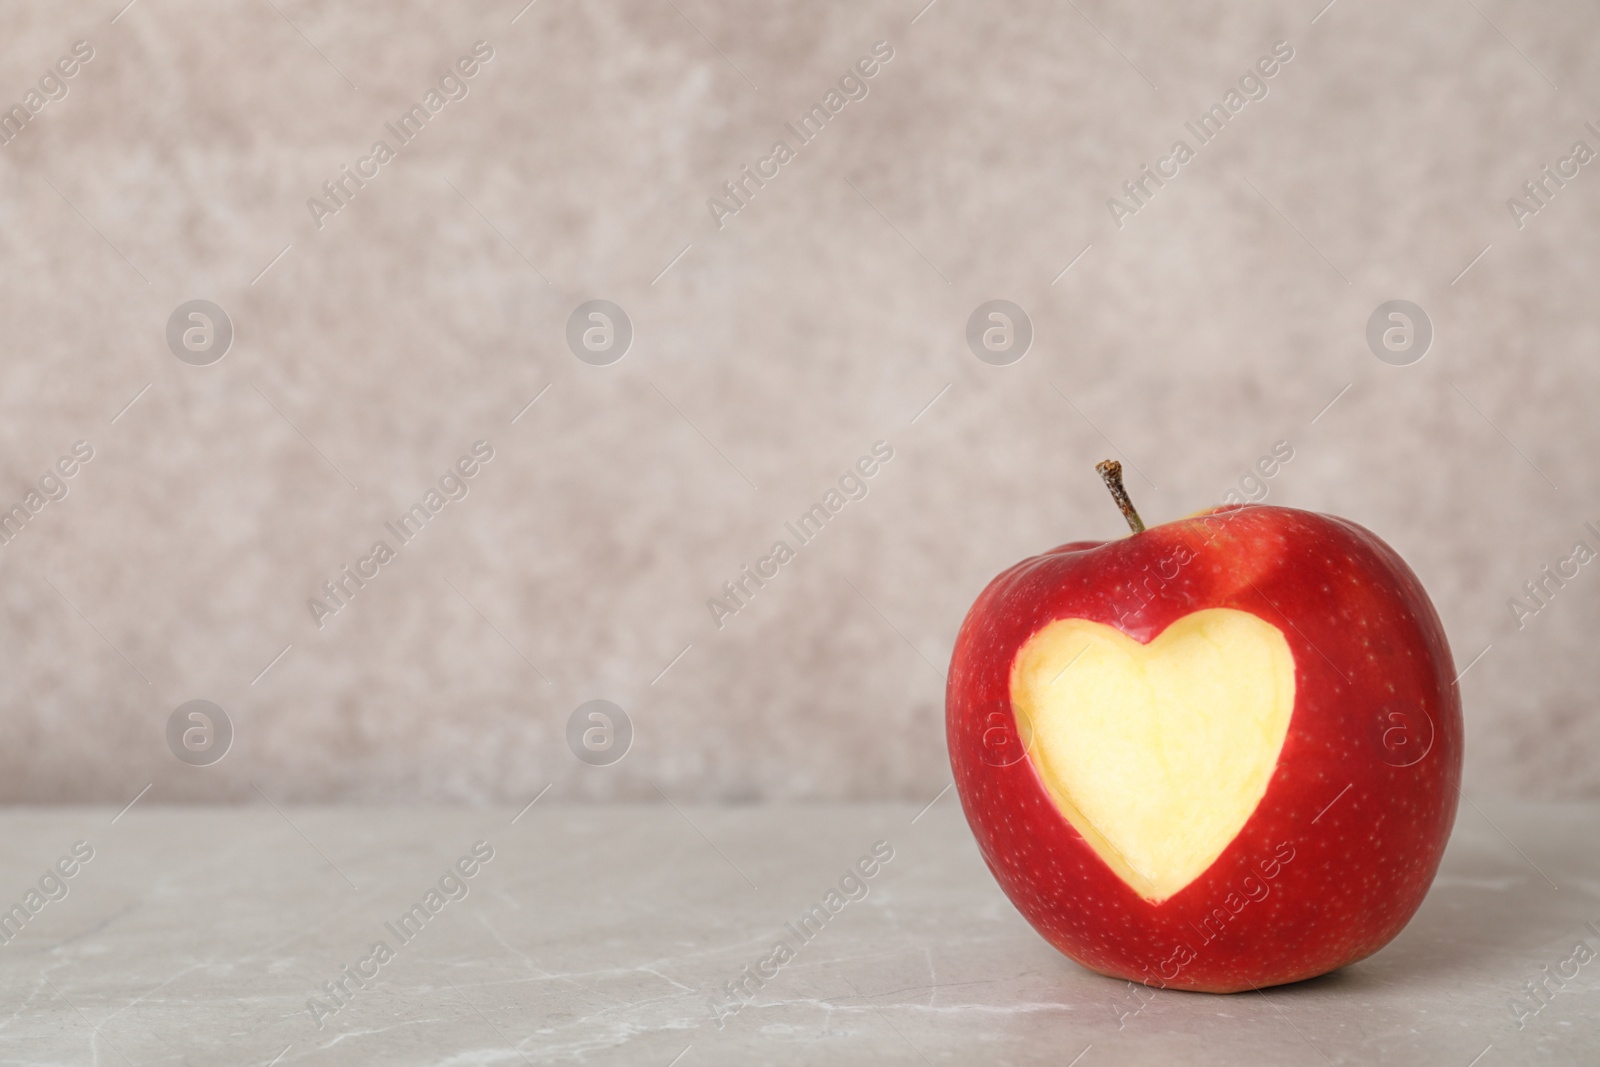 Photo of Red apple with carved heart on table against grey background. Space for text